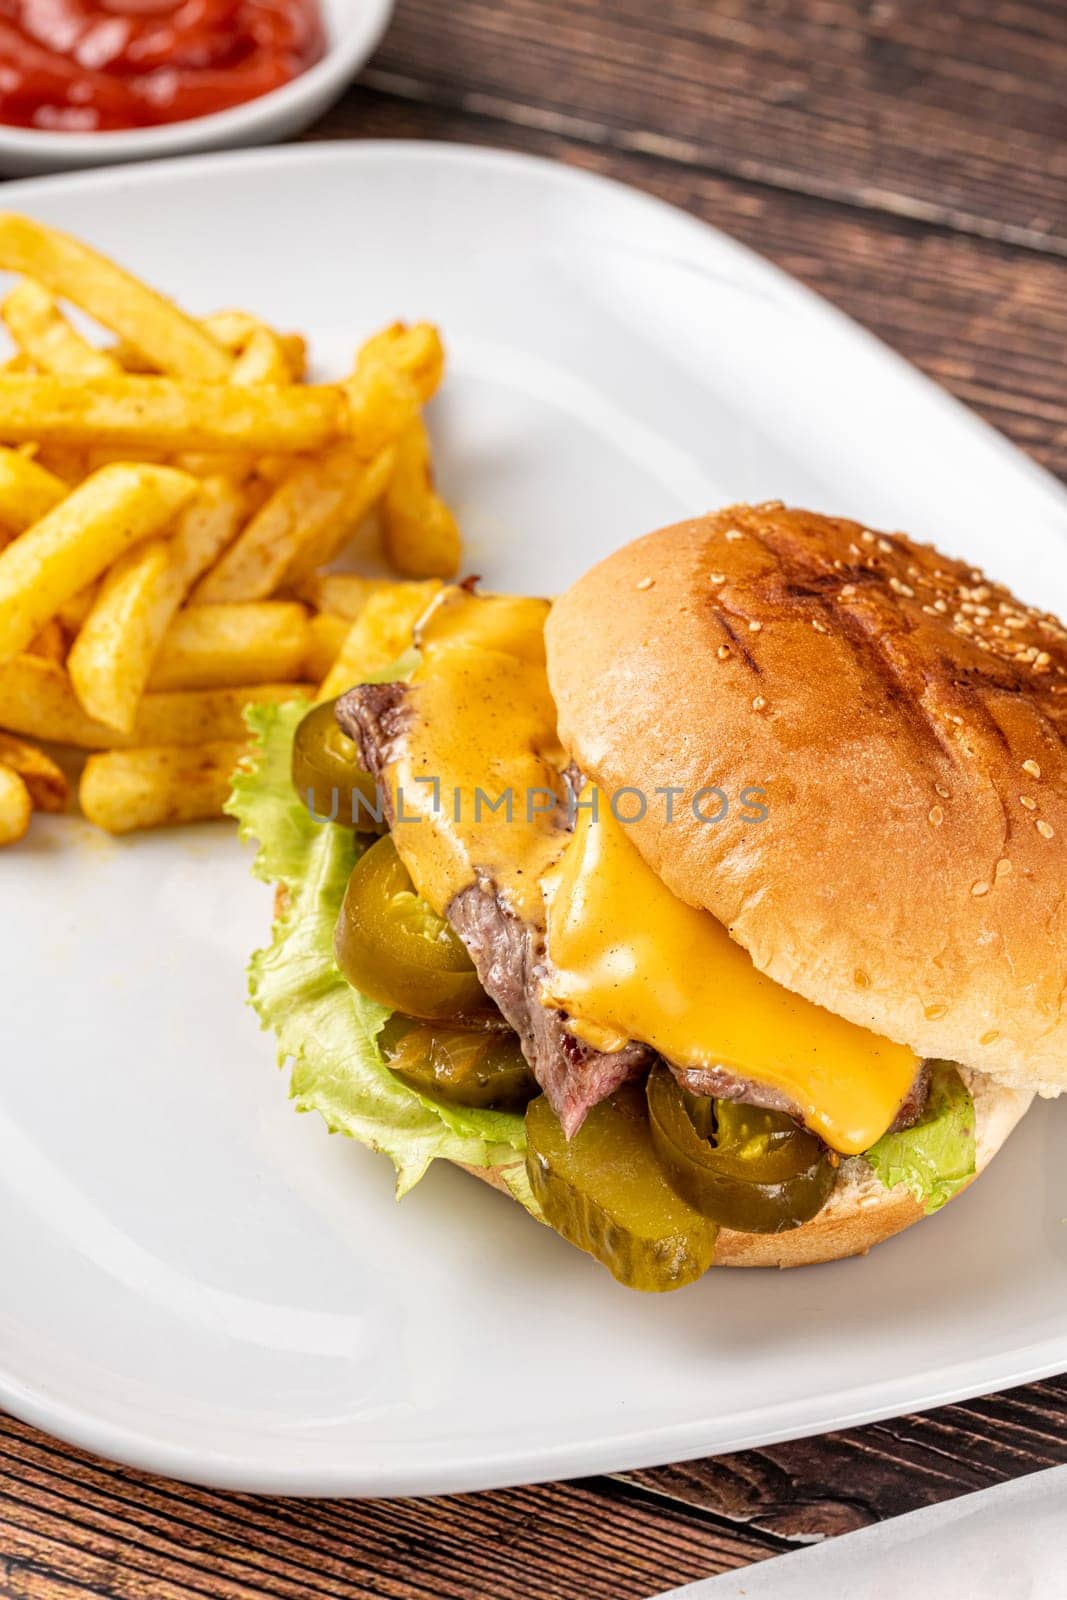 Delicious beef burger with french fries, onion rings and sauces by Sonat